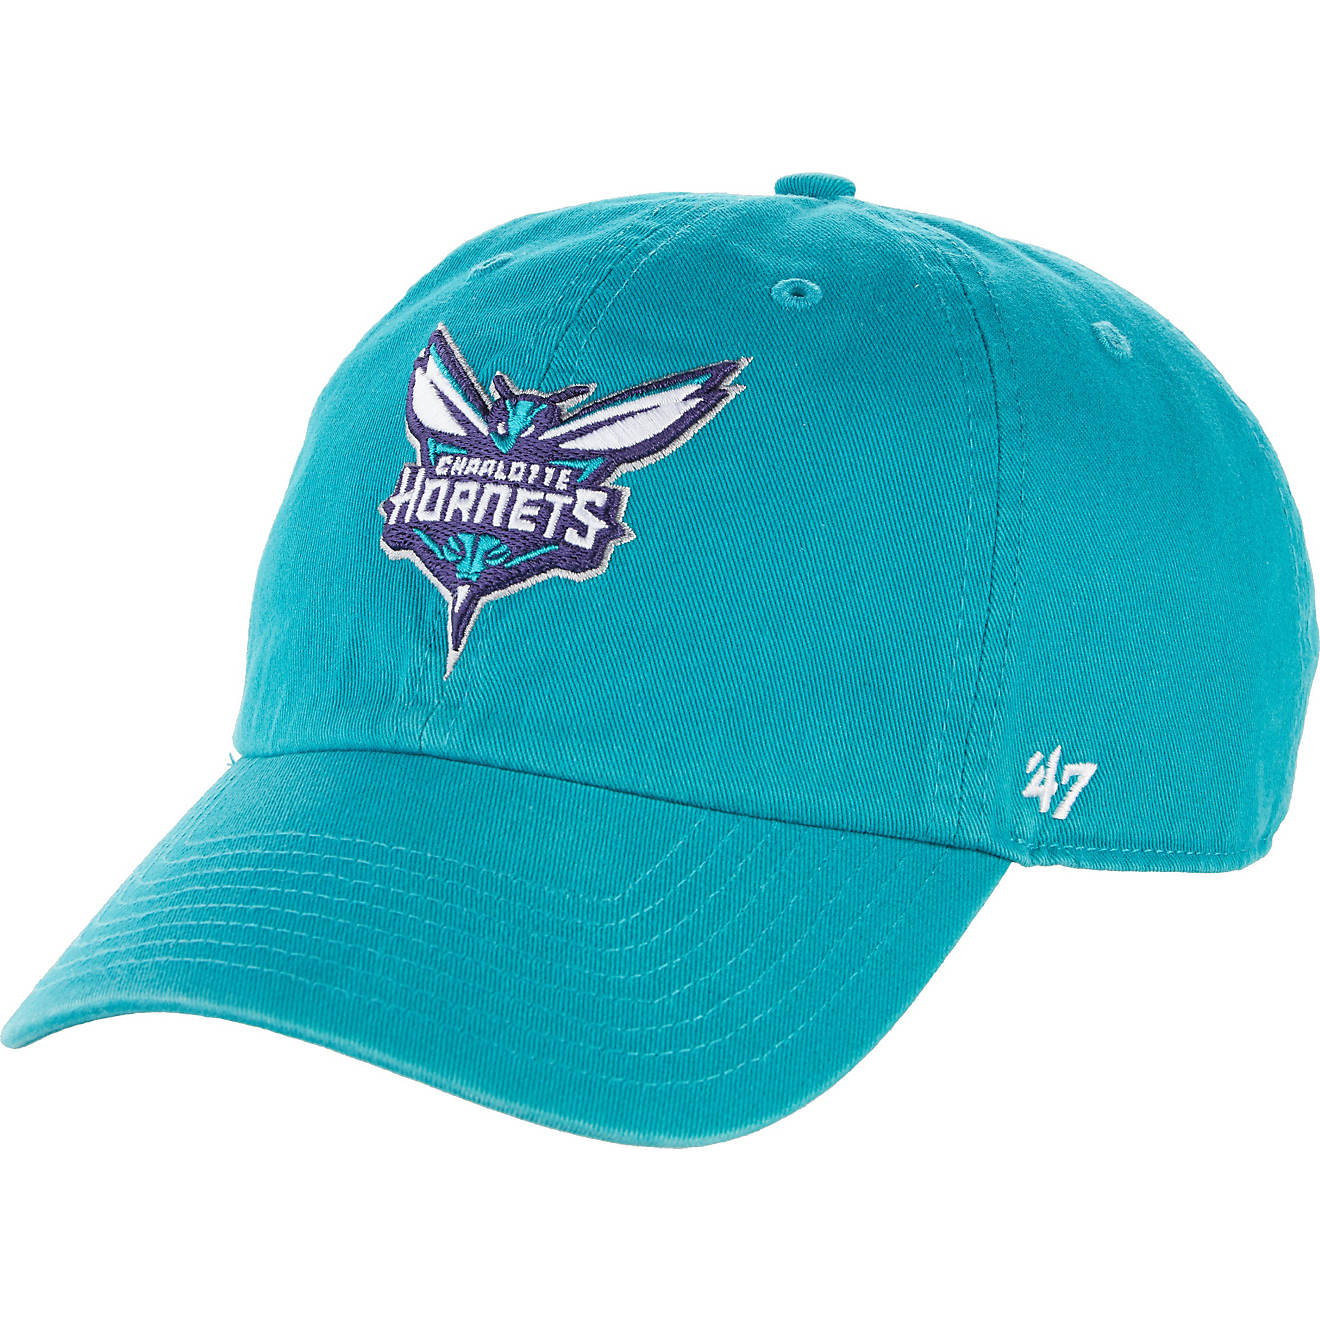 '47 Charlotte Hornets Clean Up Cap | Academy